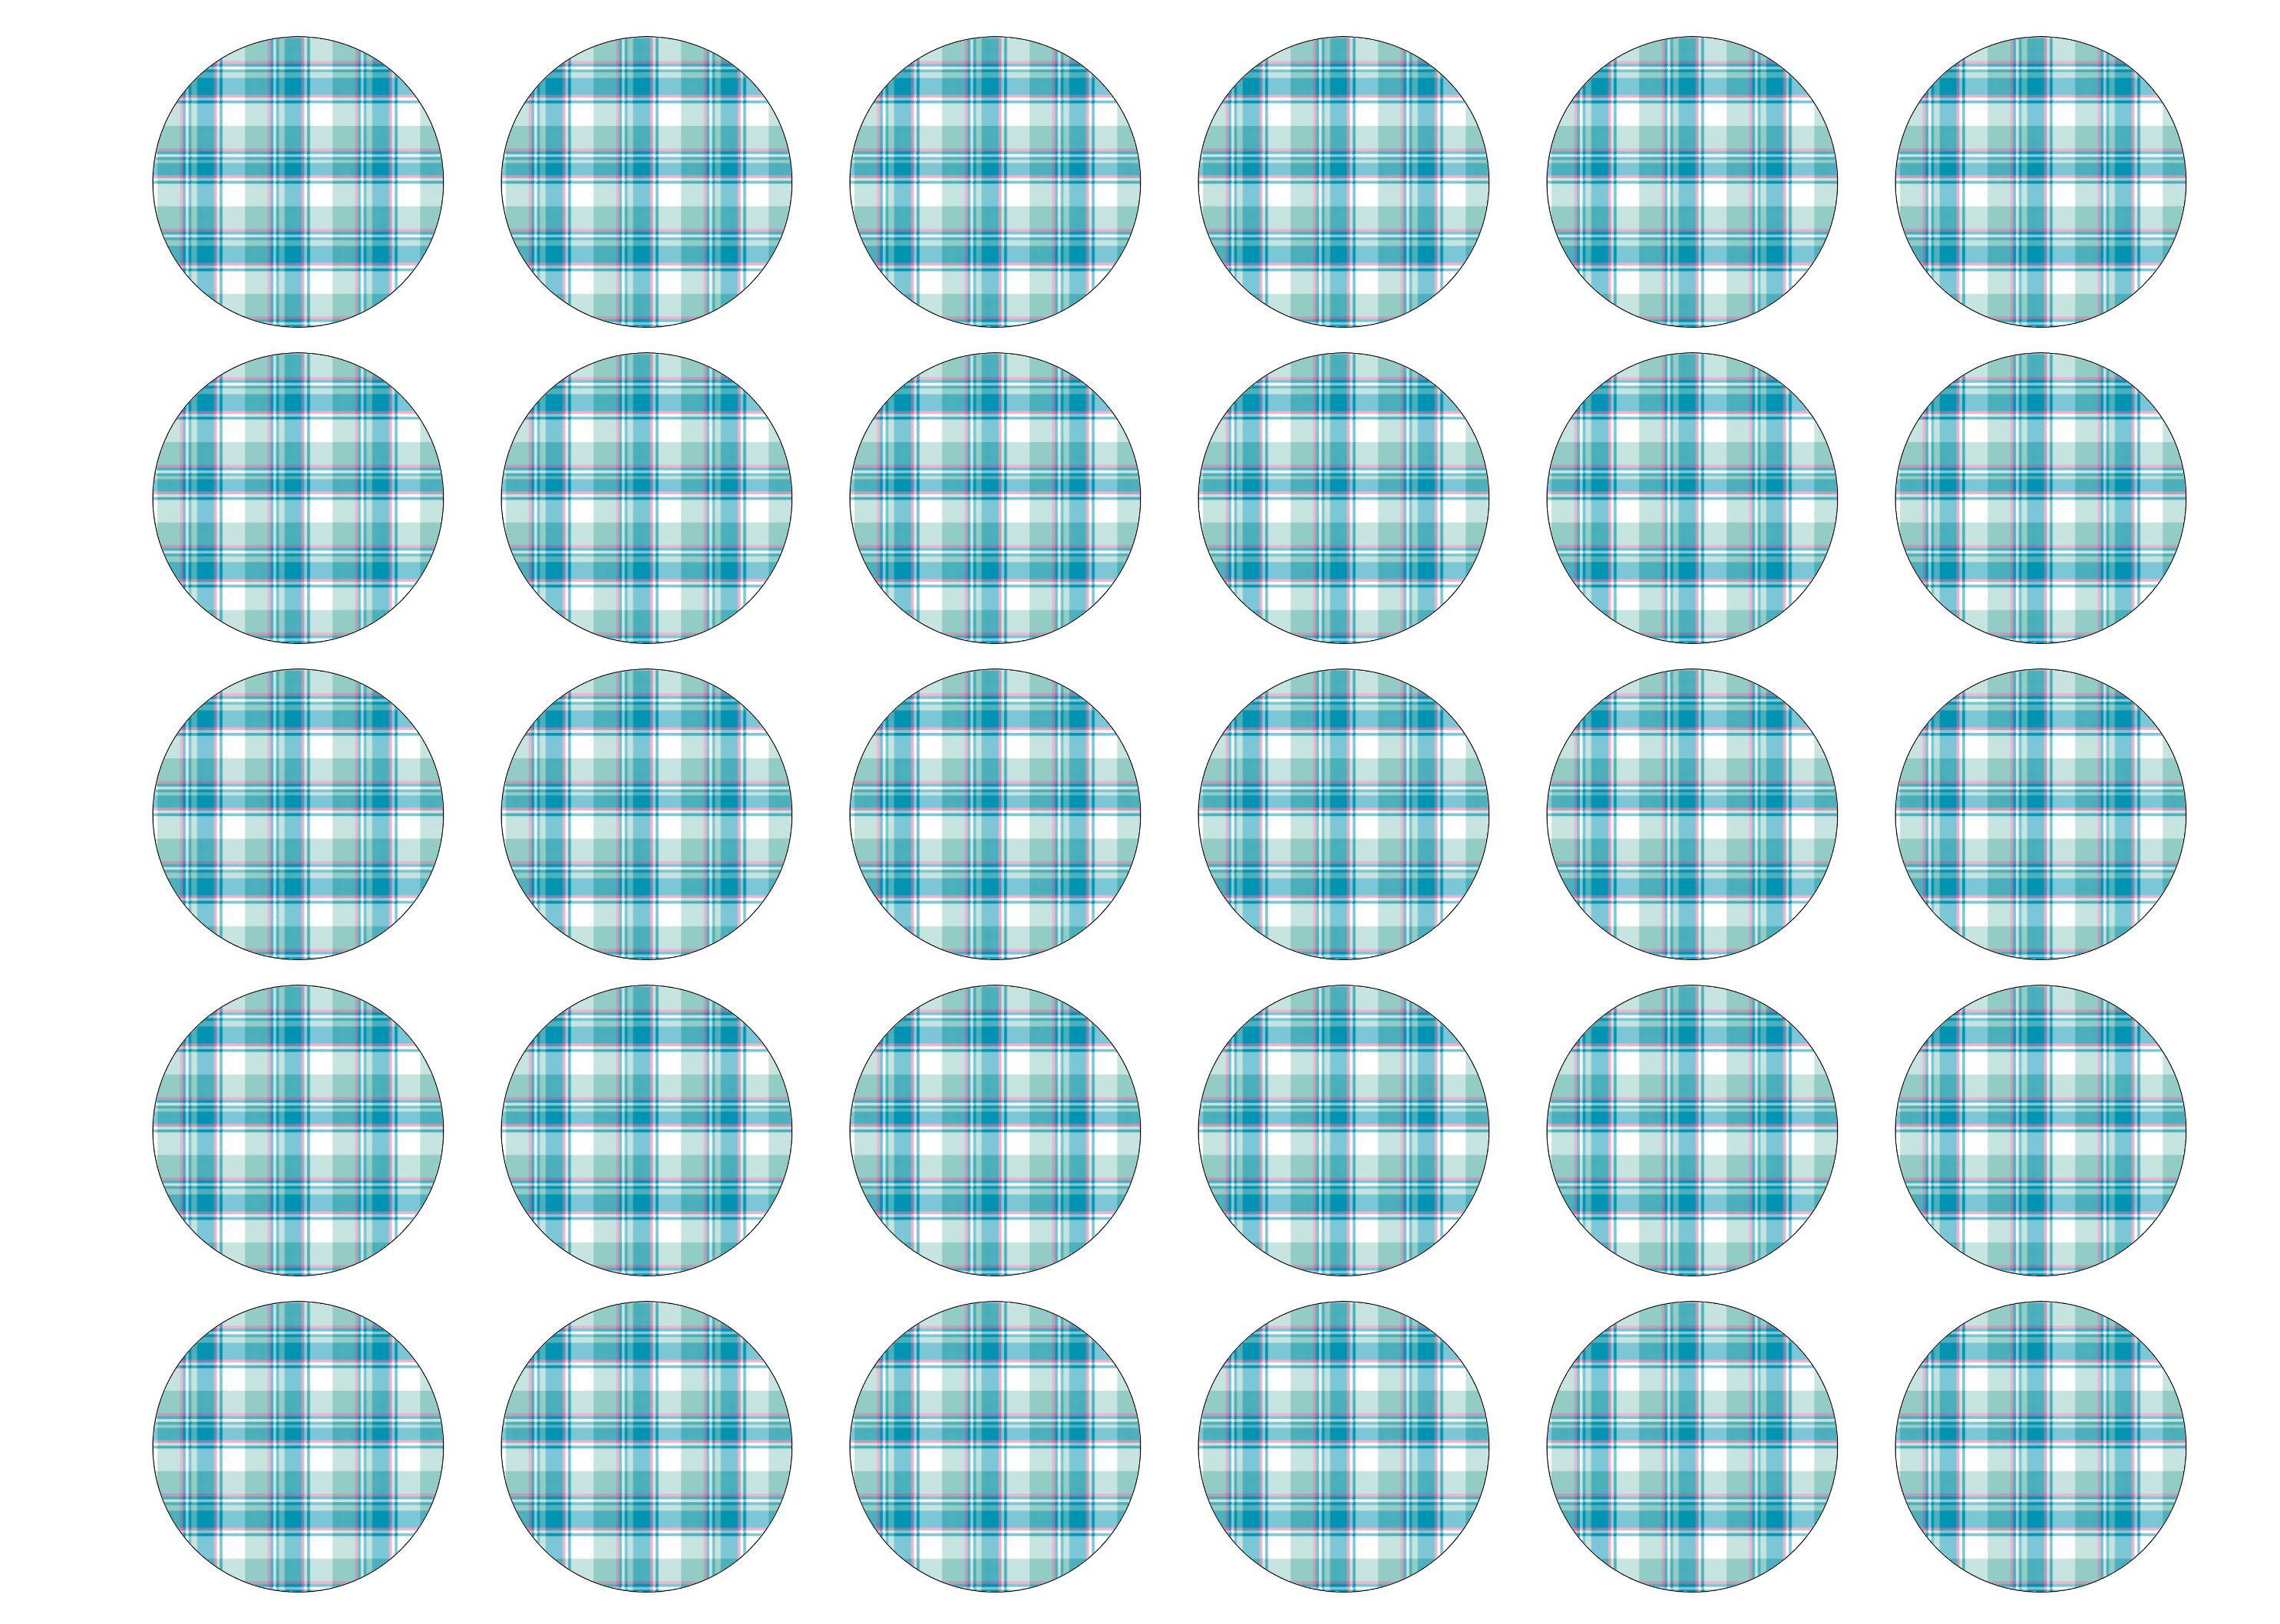 30 edible cupcake toppers with a turquoise tartan design